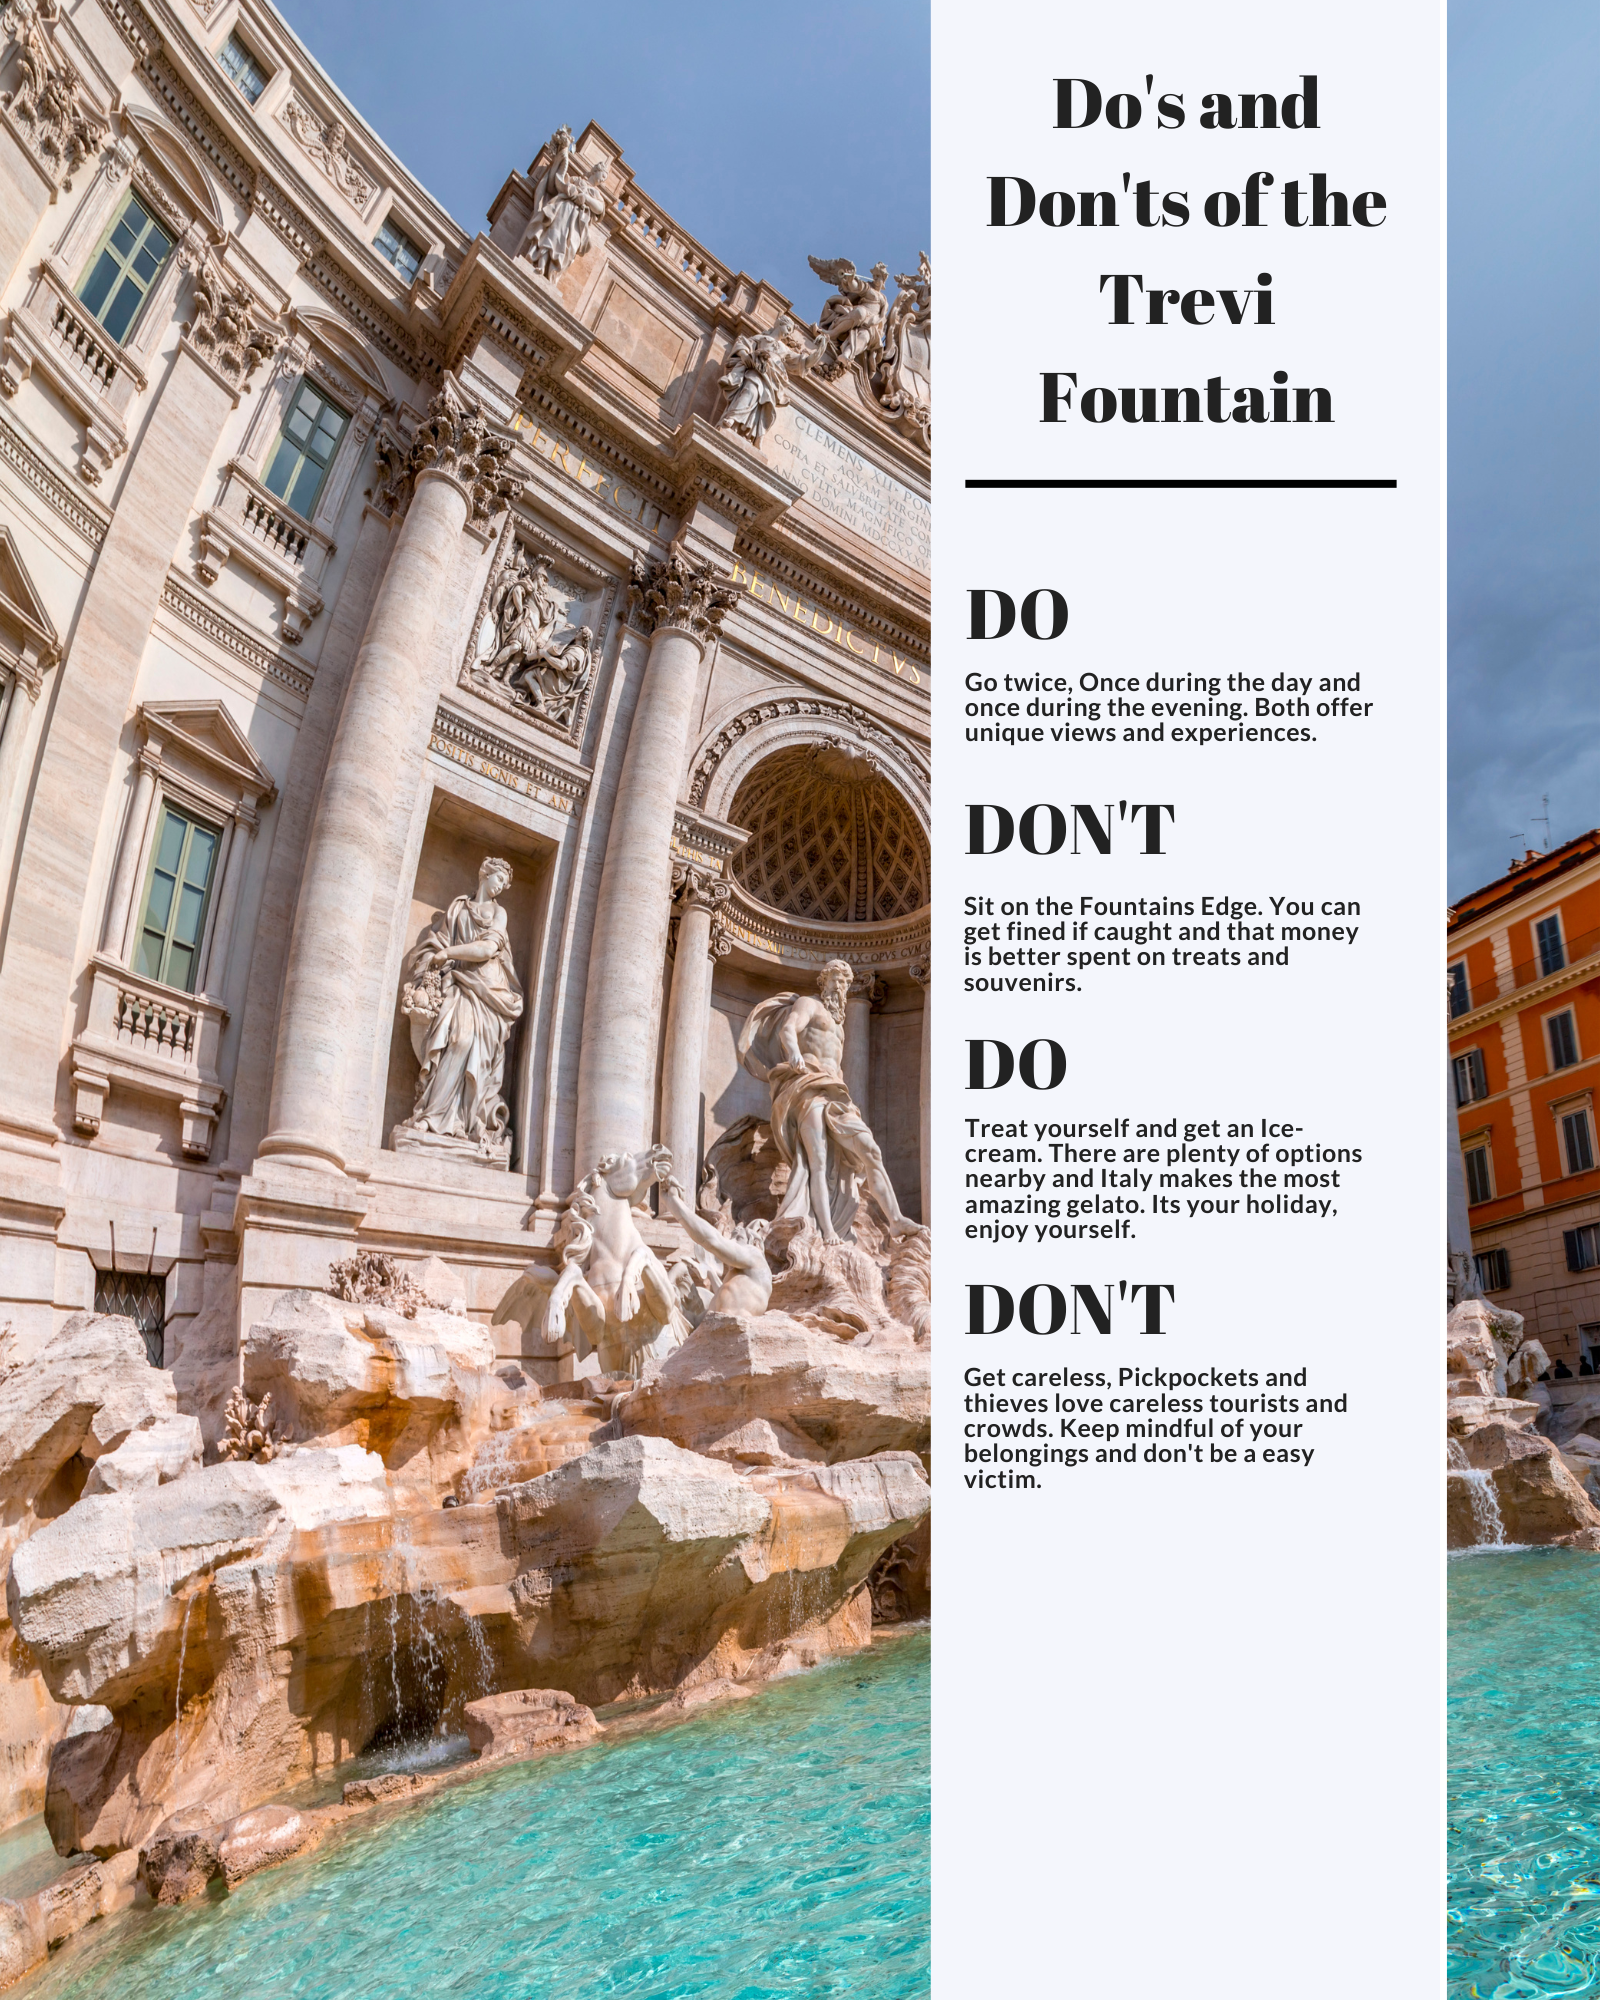 Do and Don'ts guide of the Fontana Di Trevi